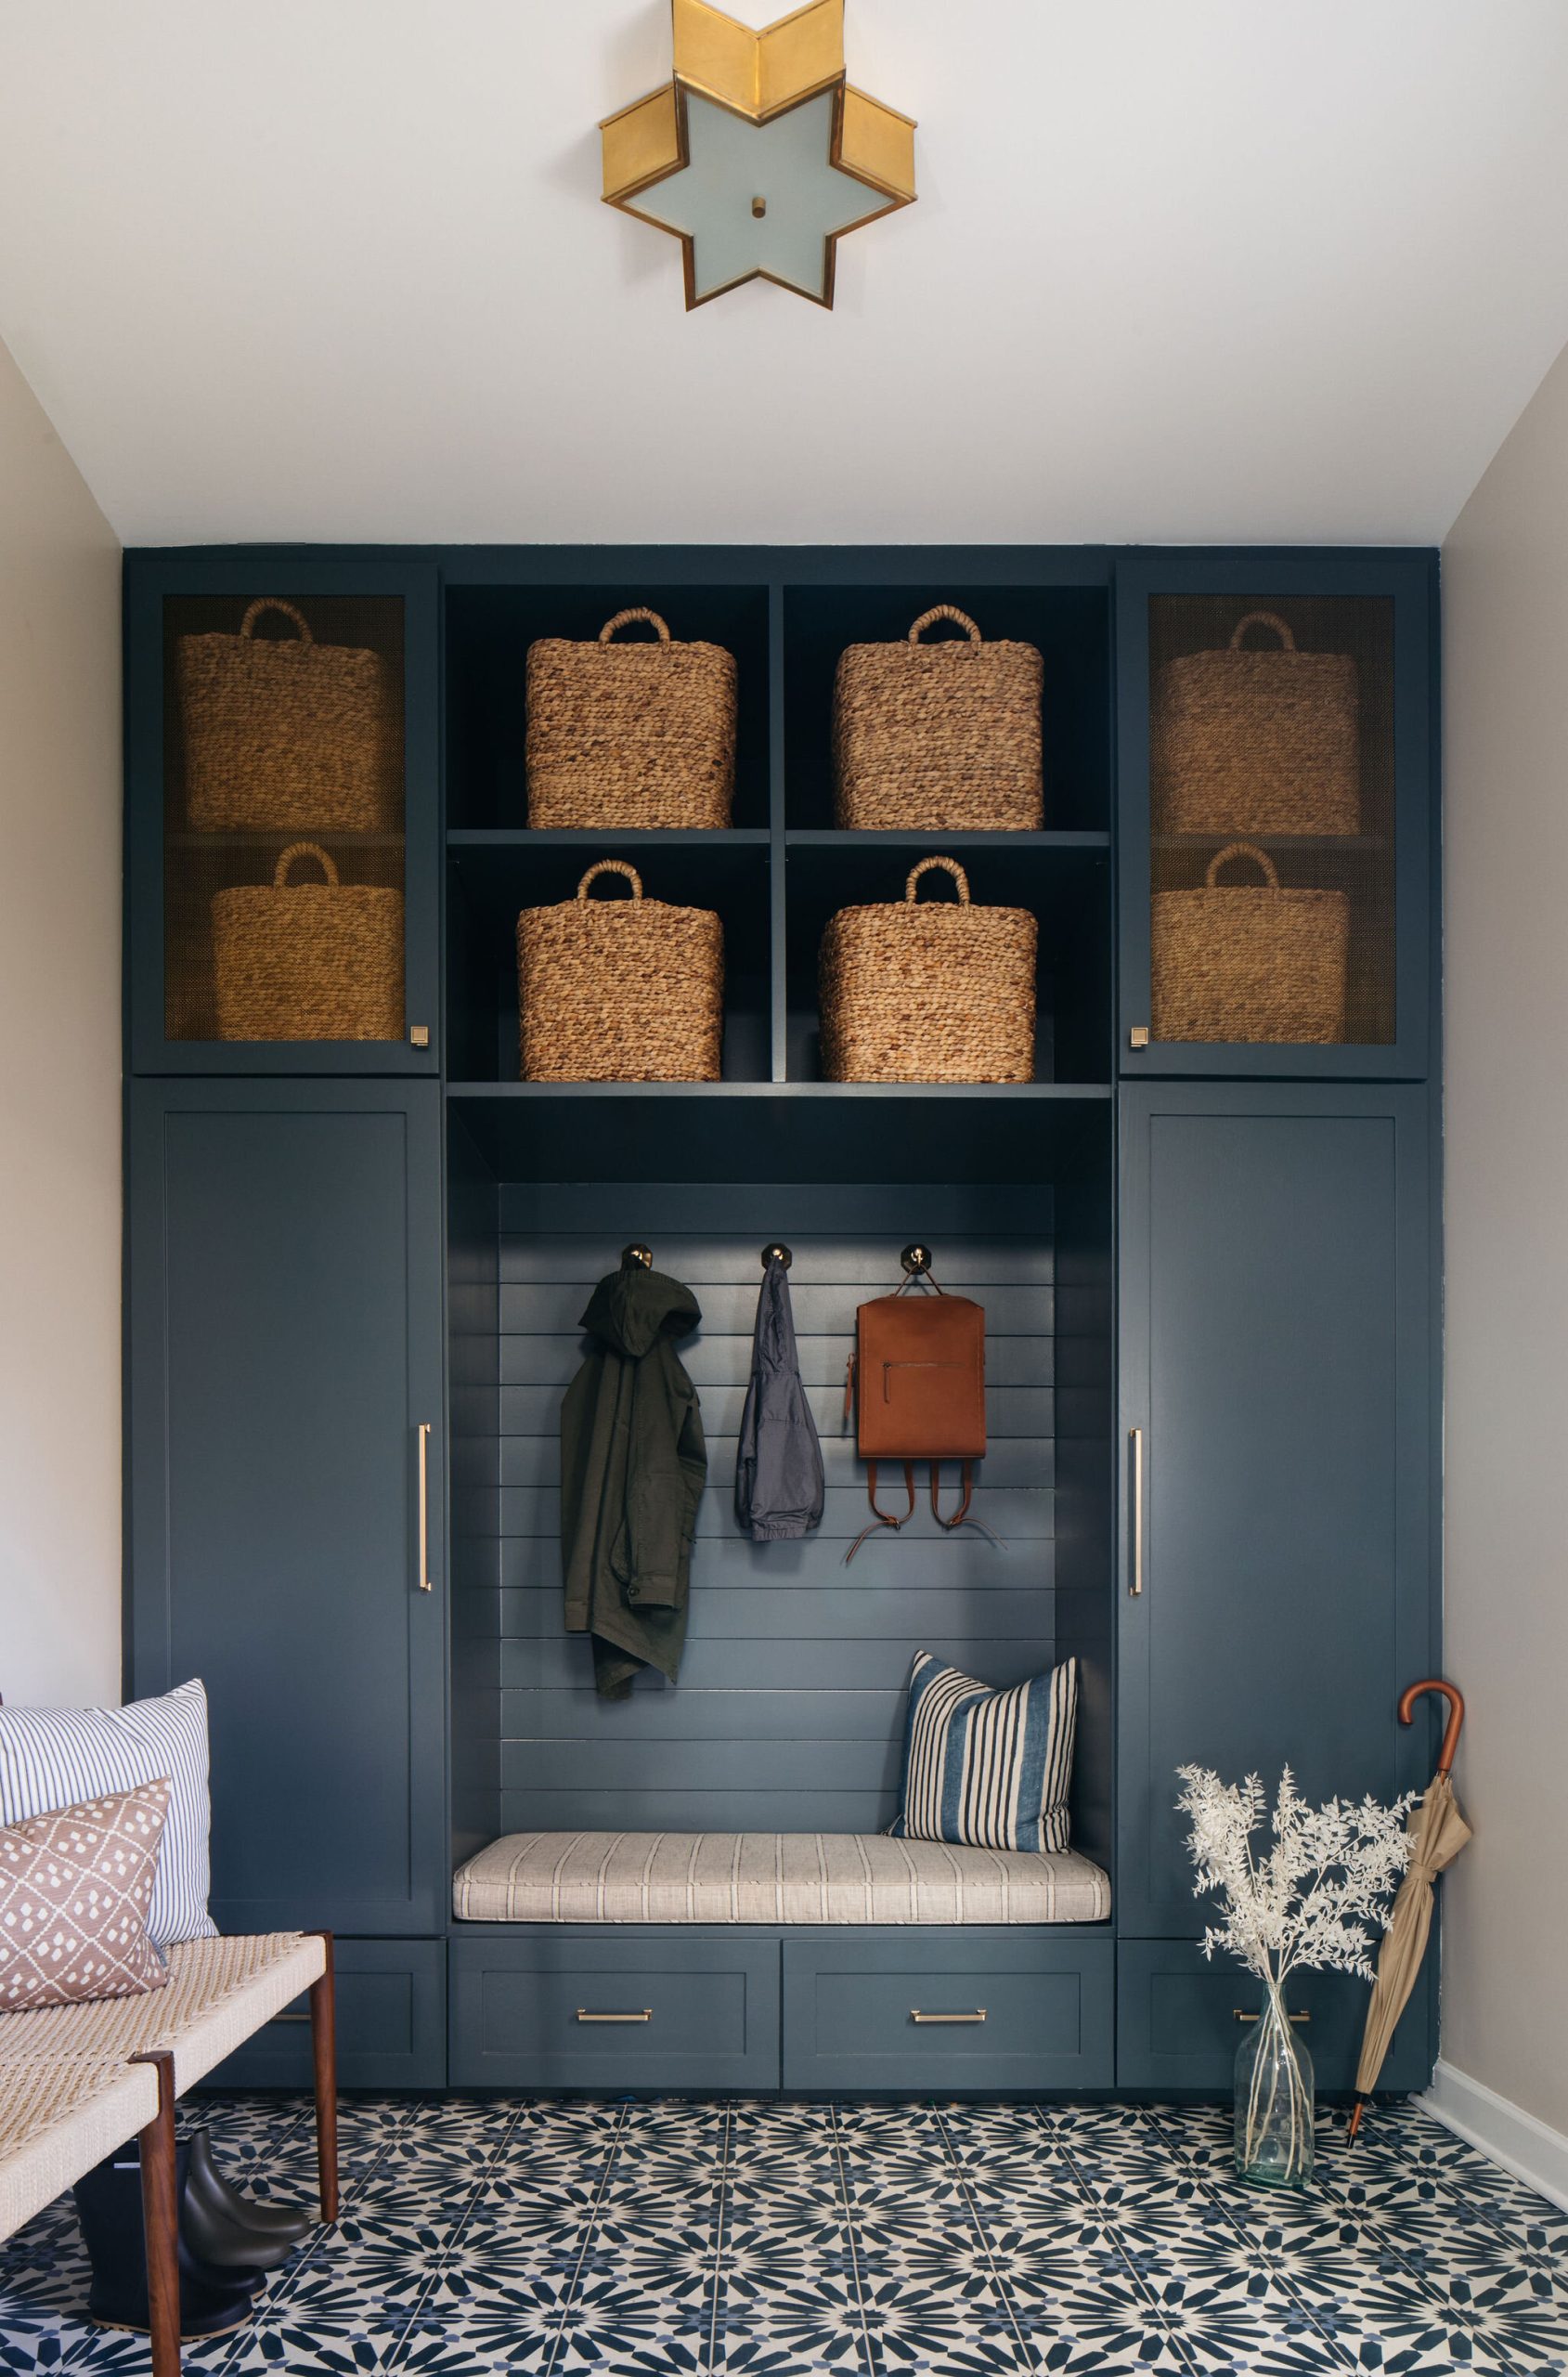 Detached wardrobe rack with clothes